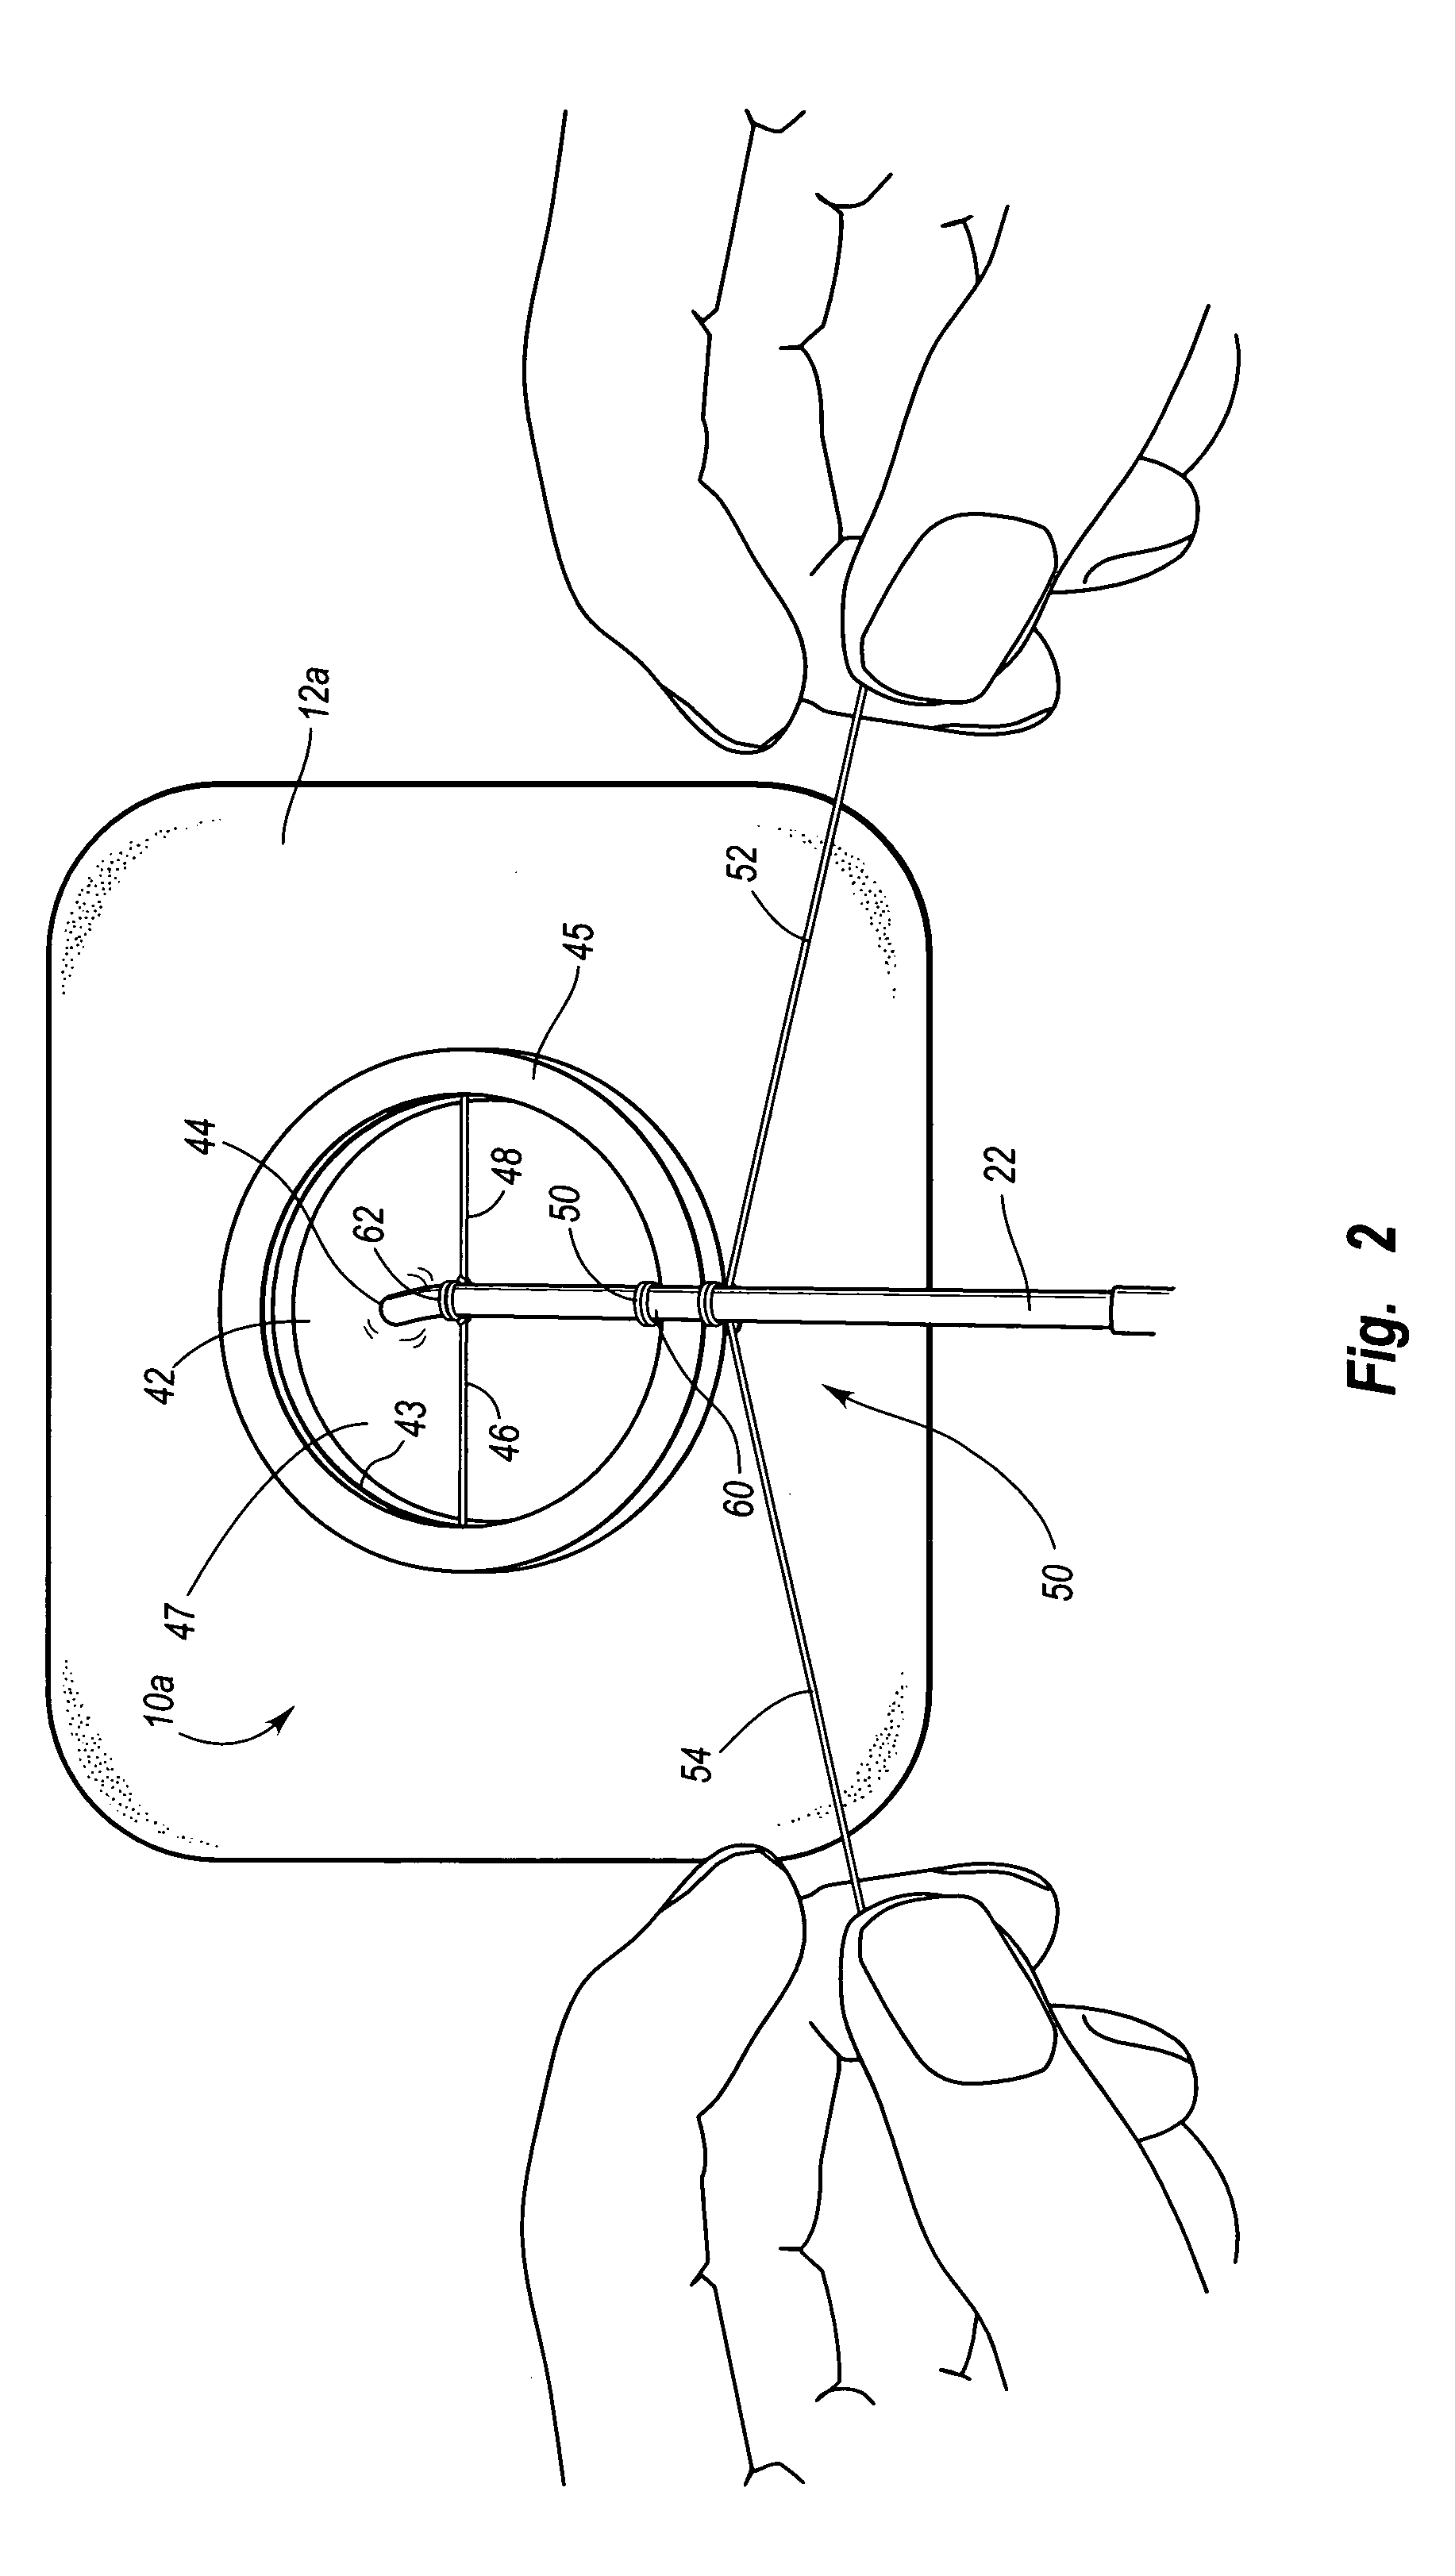 Self-suturing anchor device for a catheter